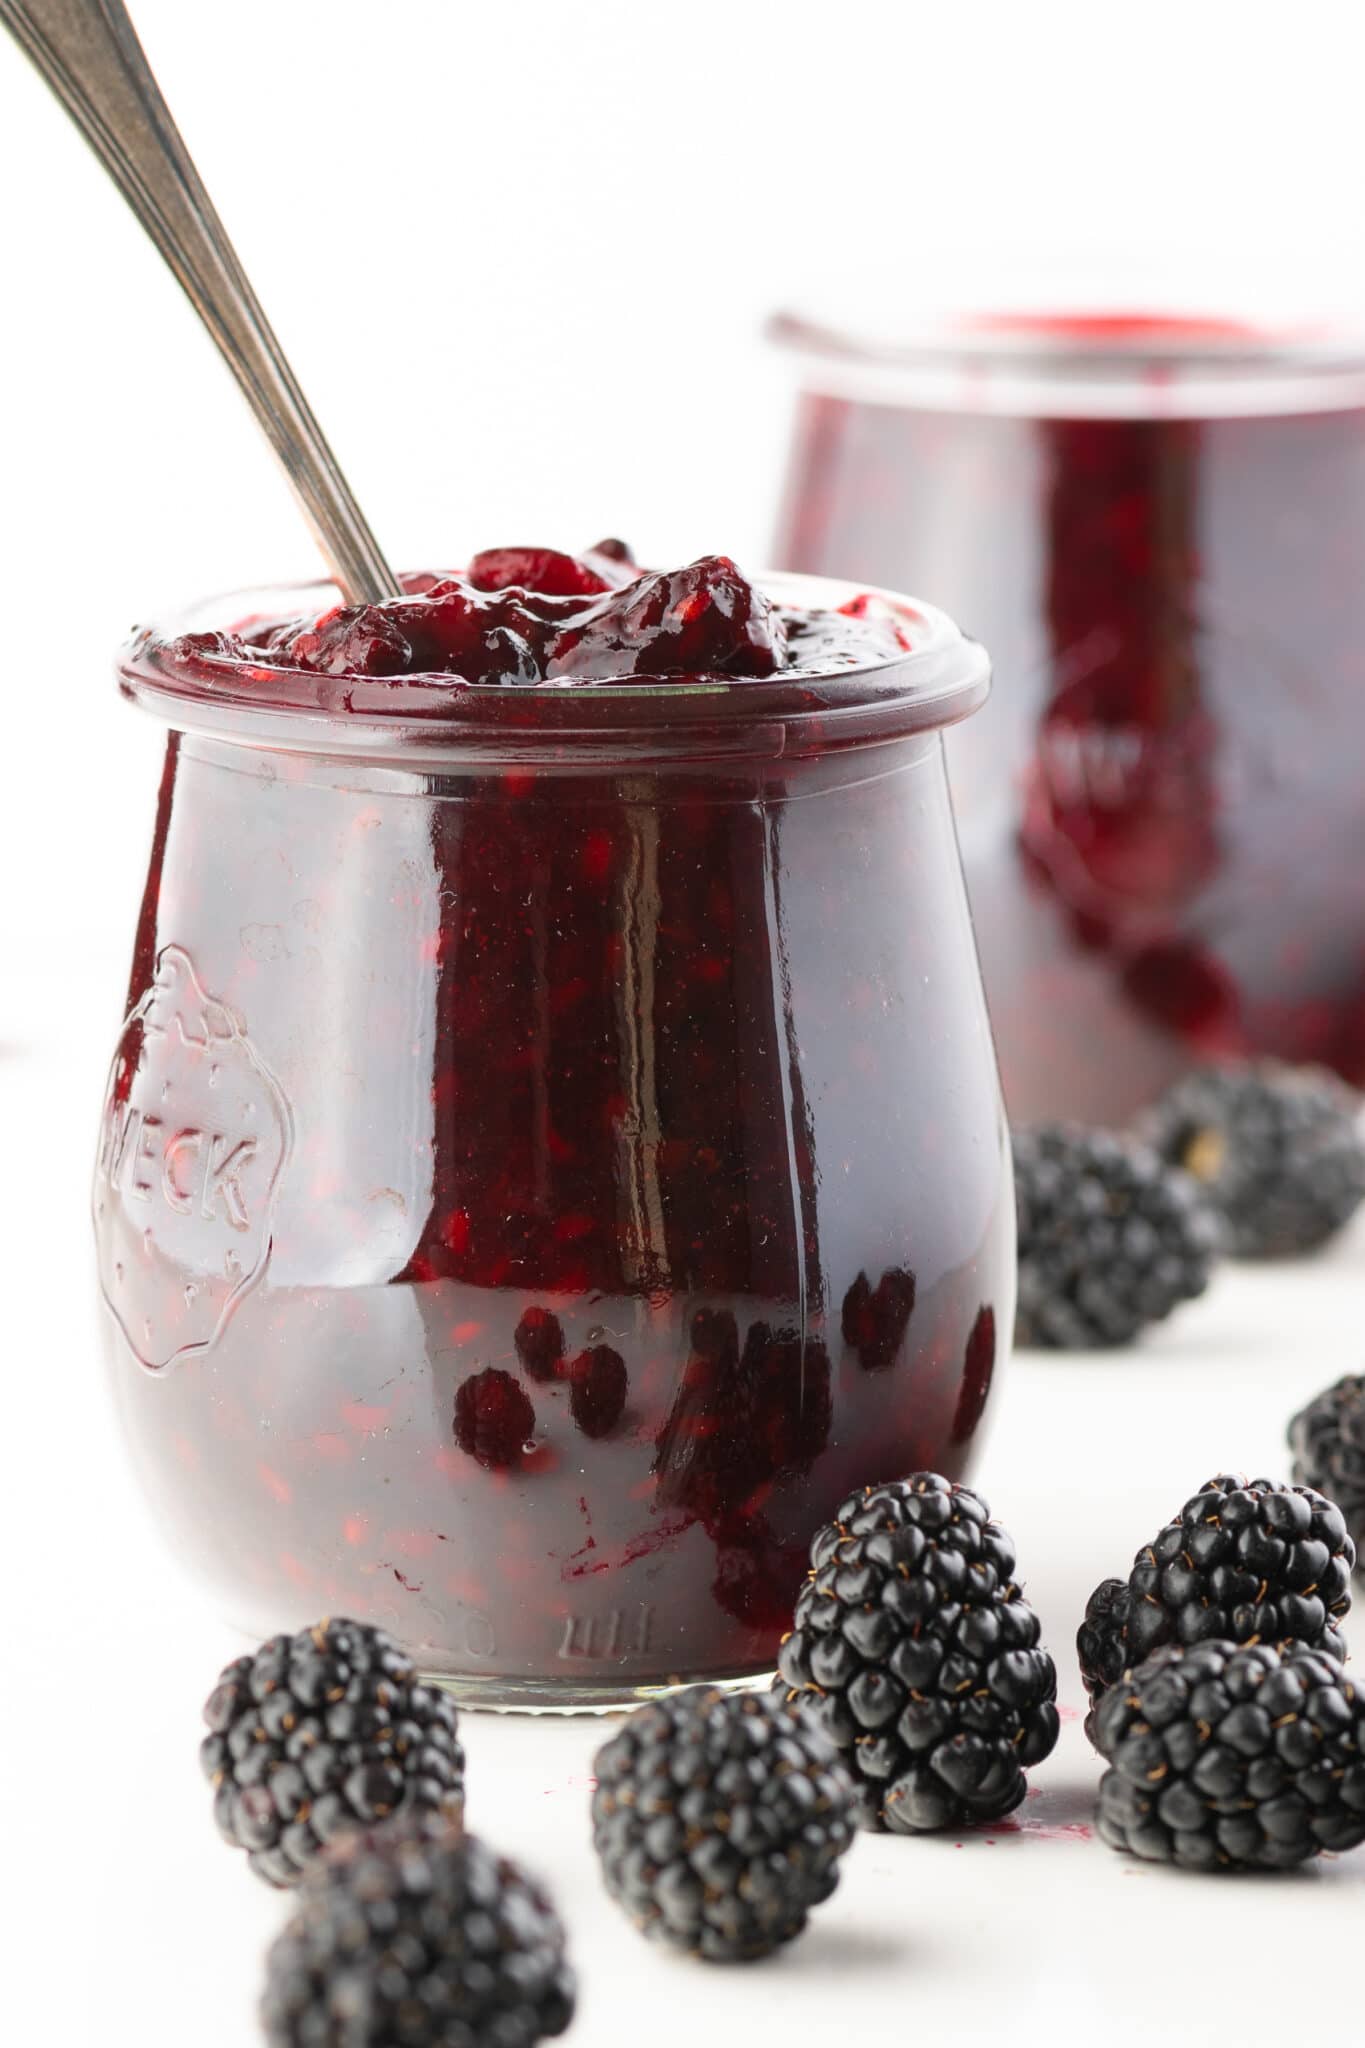 A small jar of sugar-free blackberry jam with a spoon dipped into it.